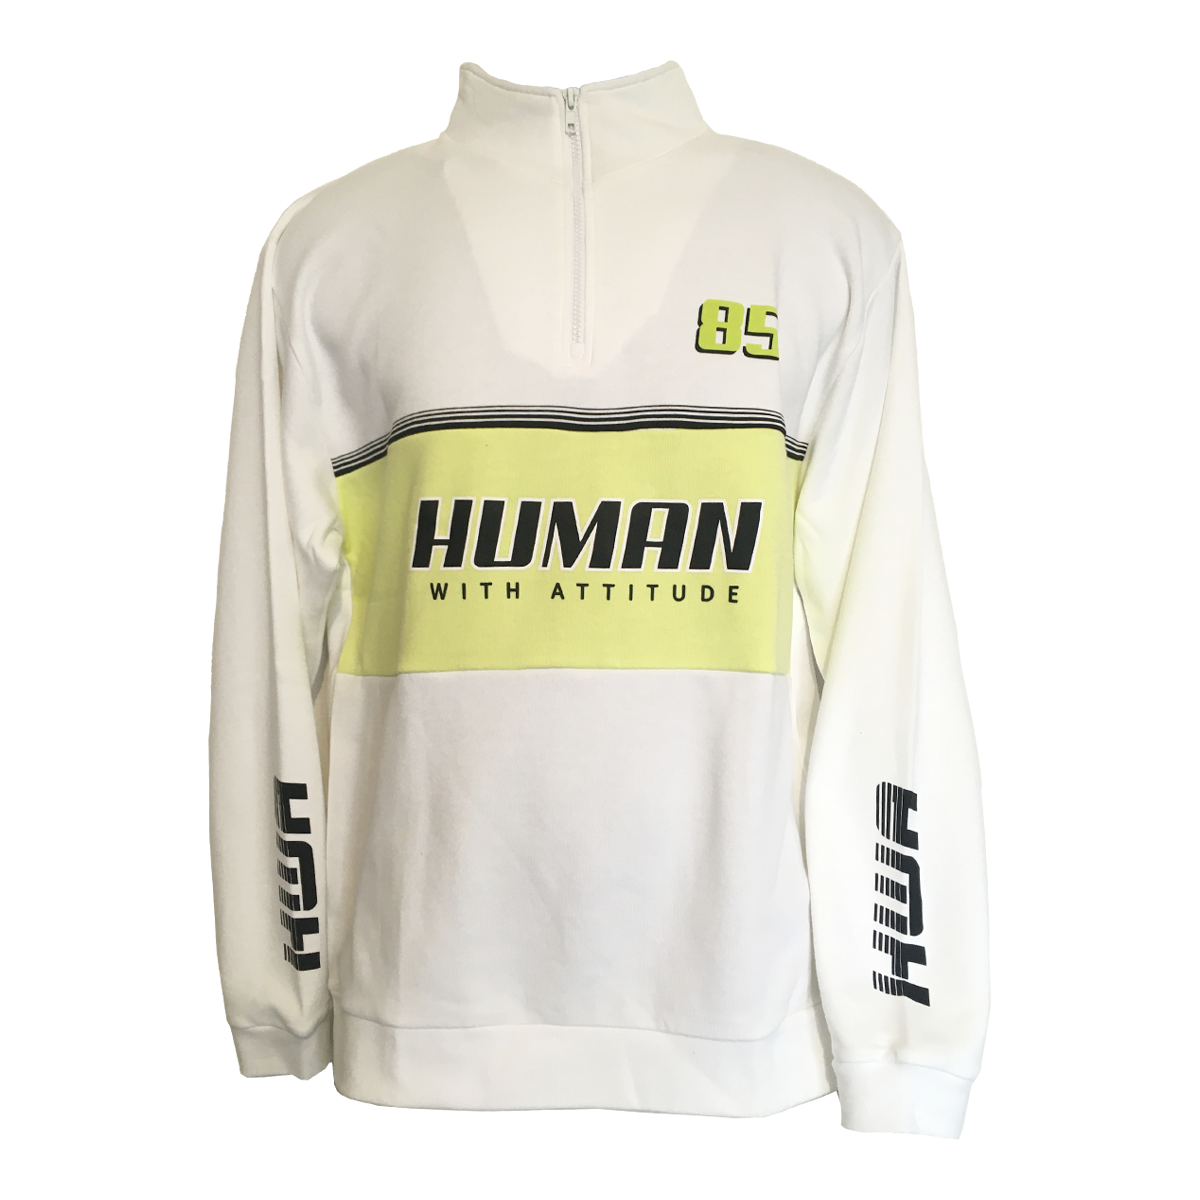 Human With Attitude zip up cotton sweat (size M)